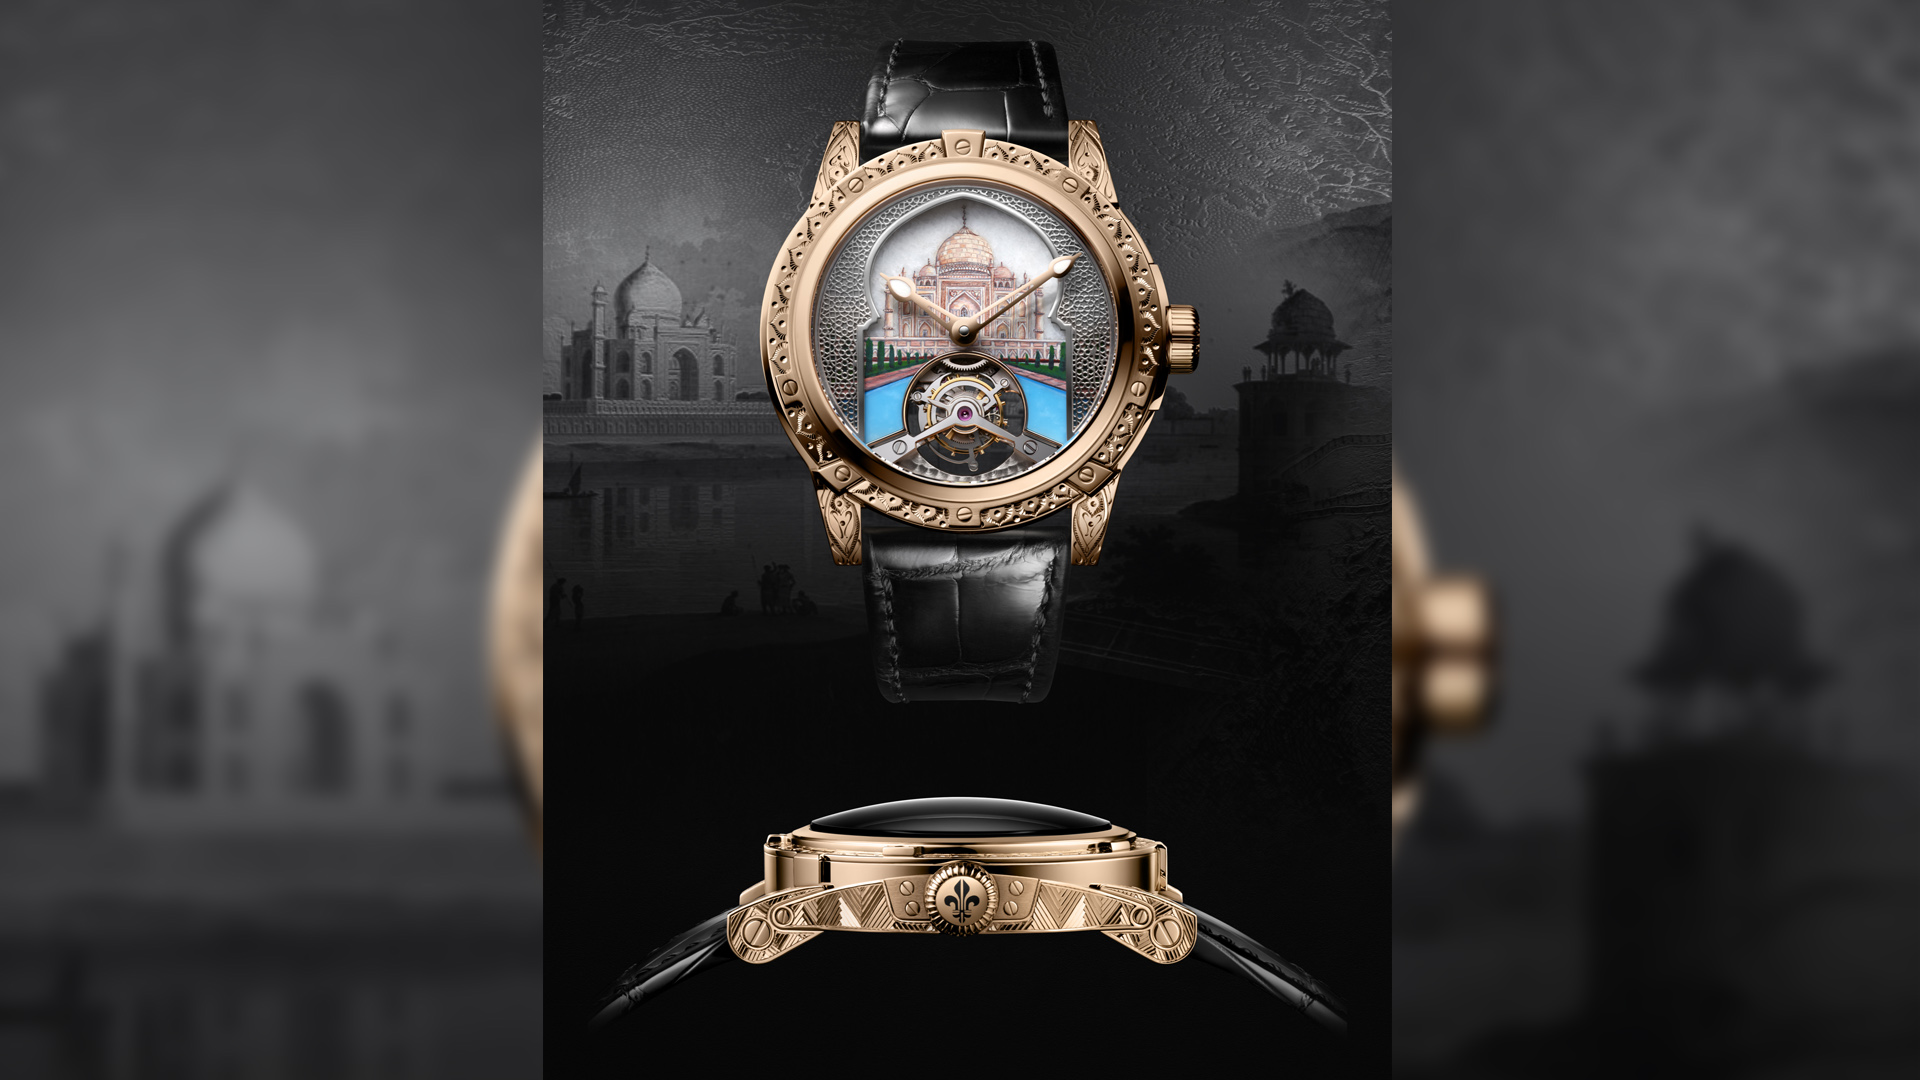 Major historical marvels emulated in the form of a watch collection